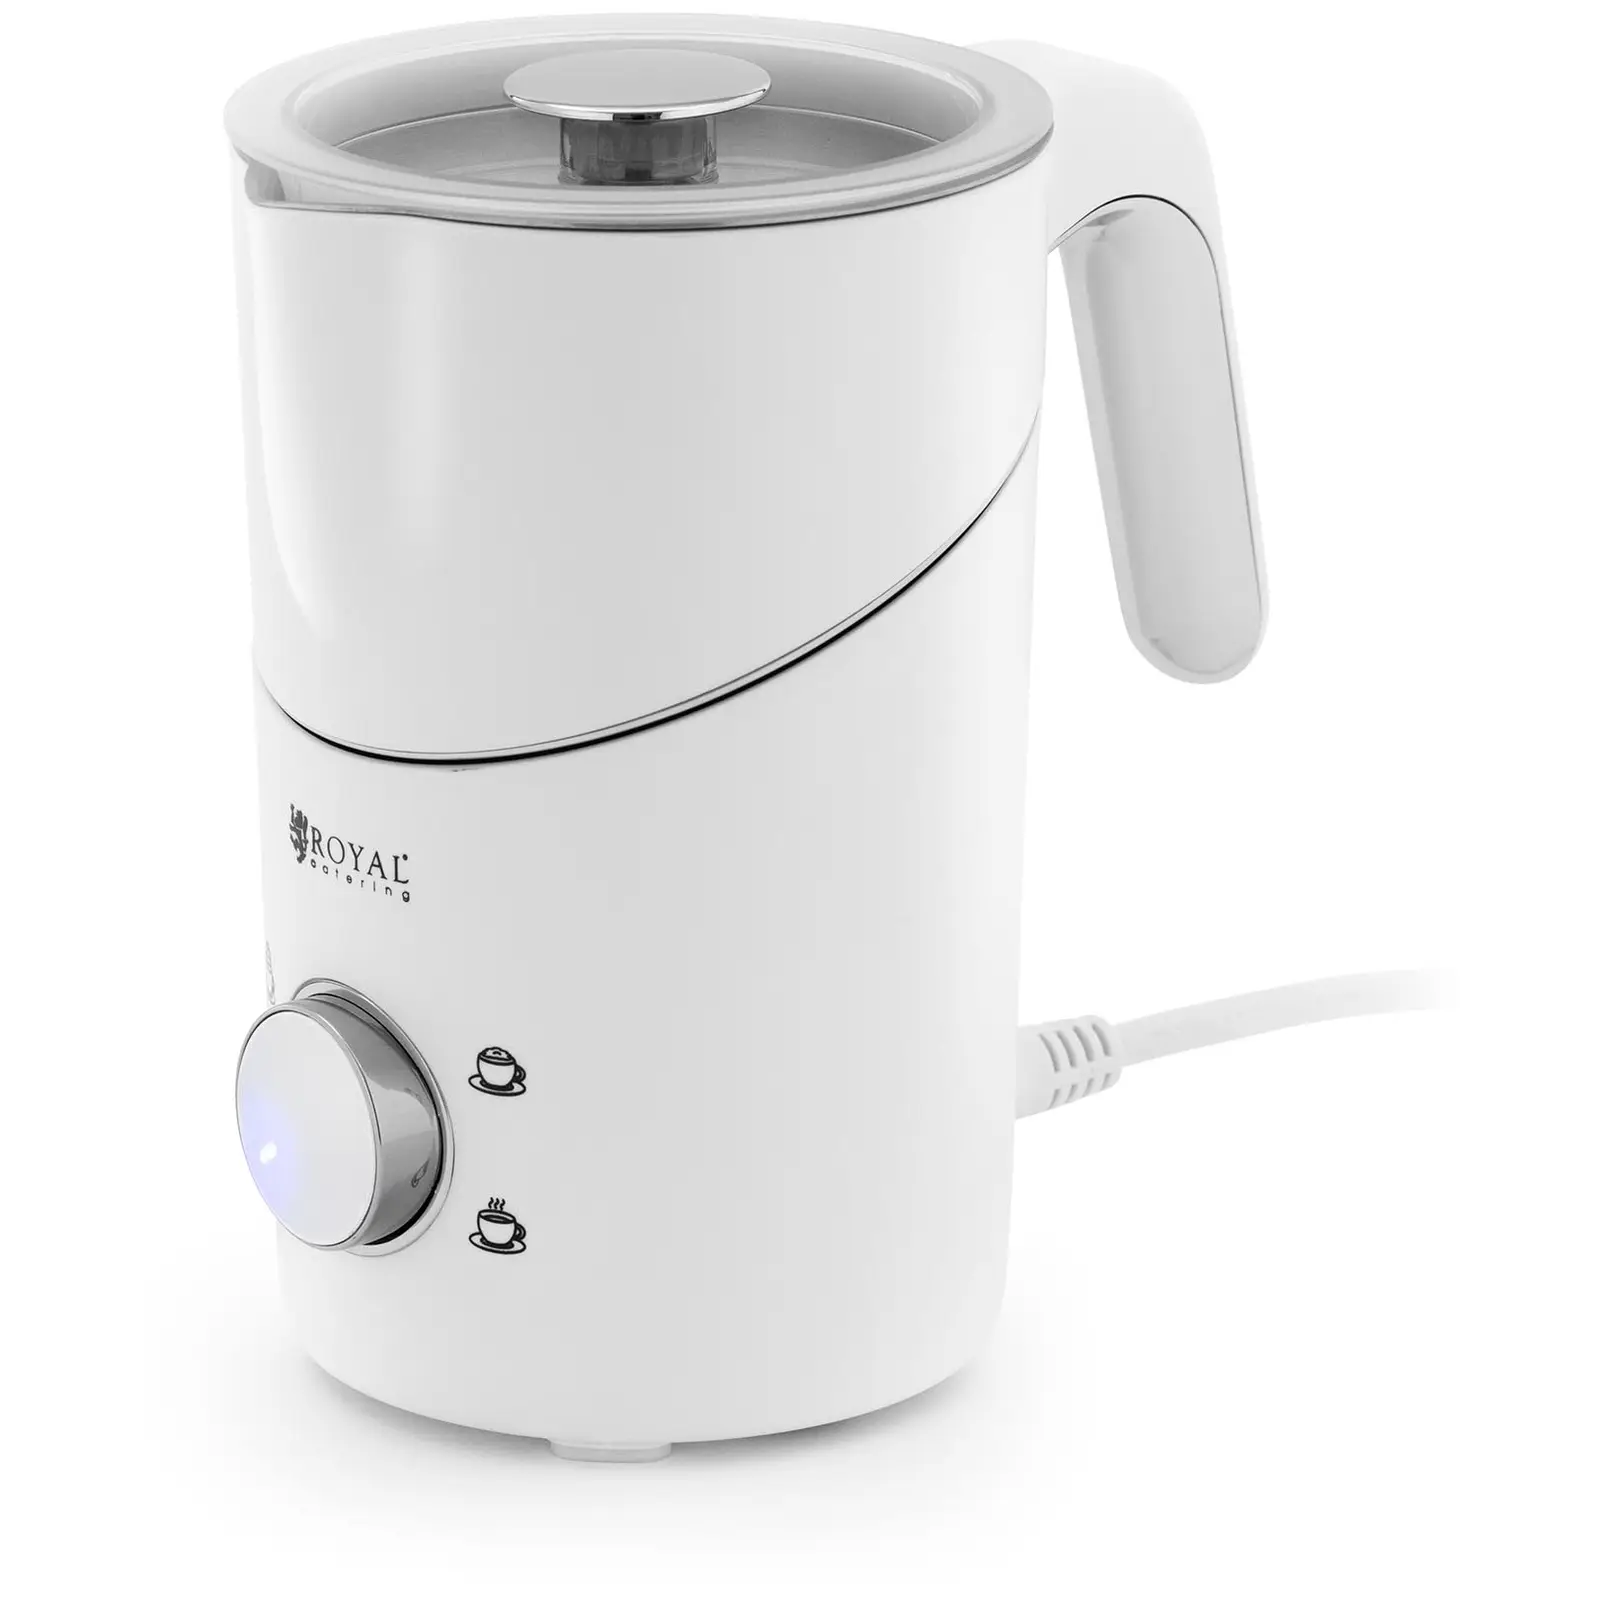 Milk frother - 0.6 l - 4 programmes